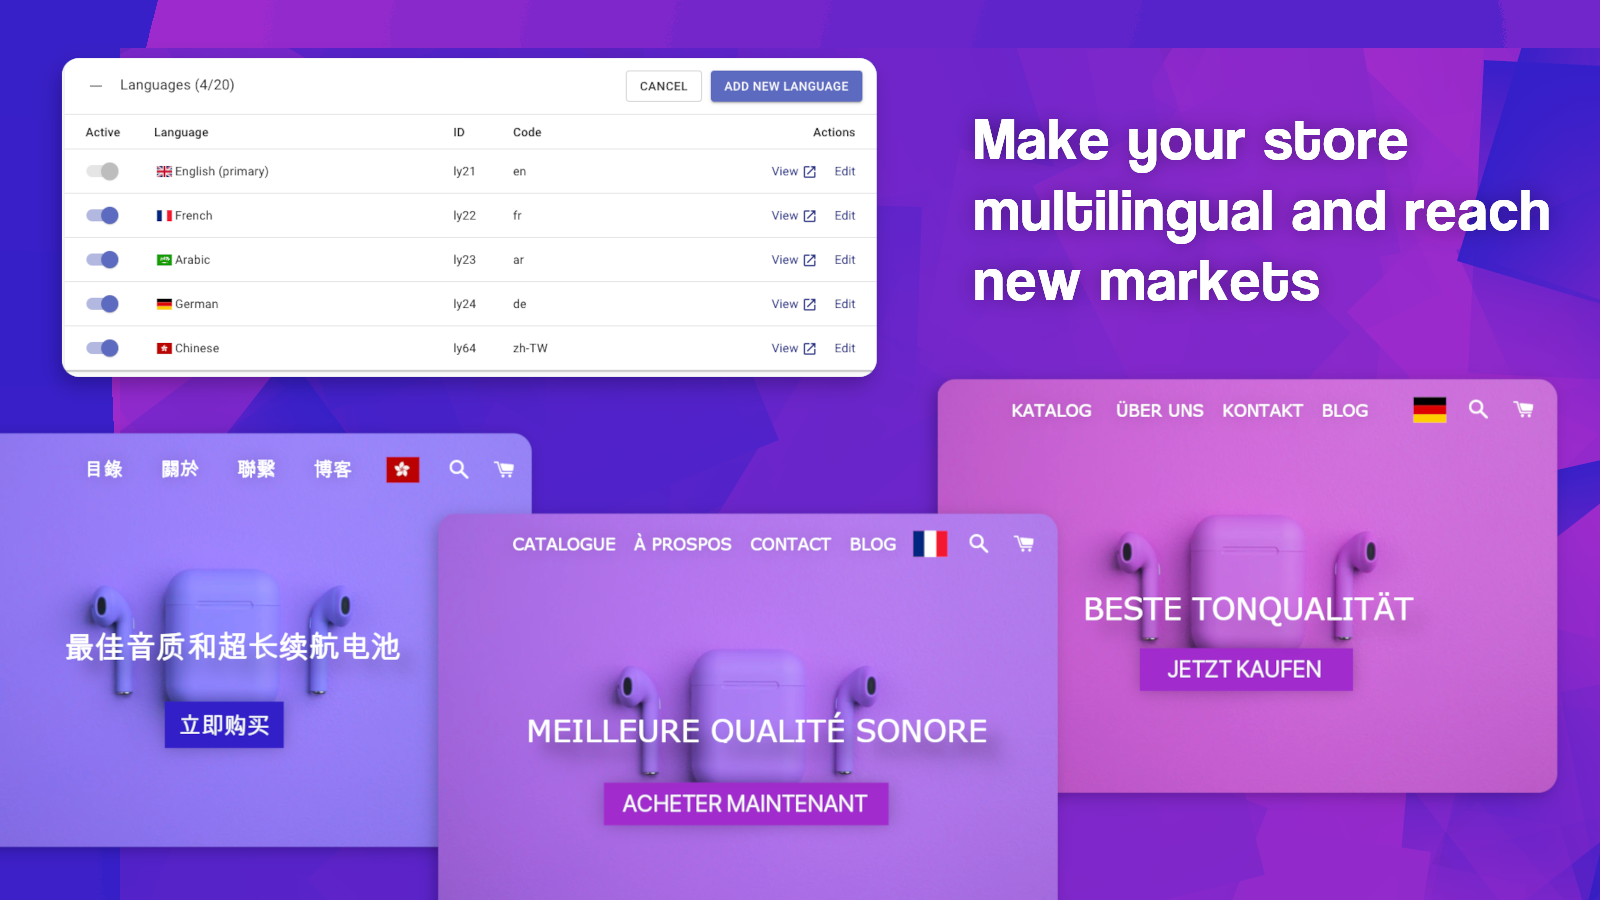 Make your store multilingual and reach new markets